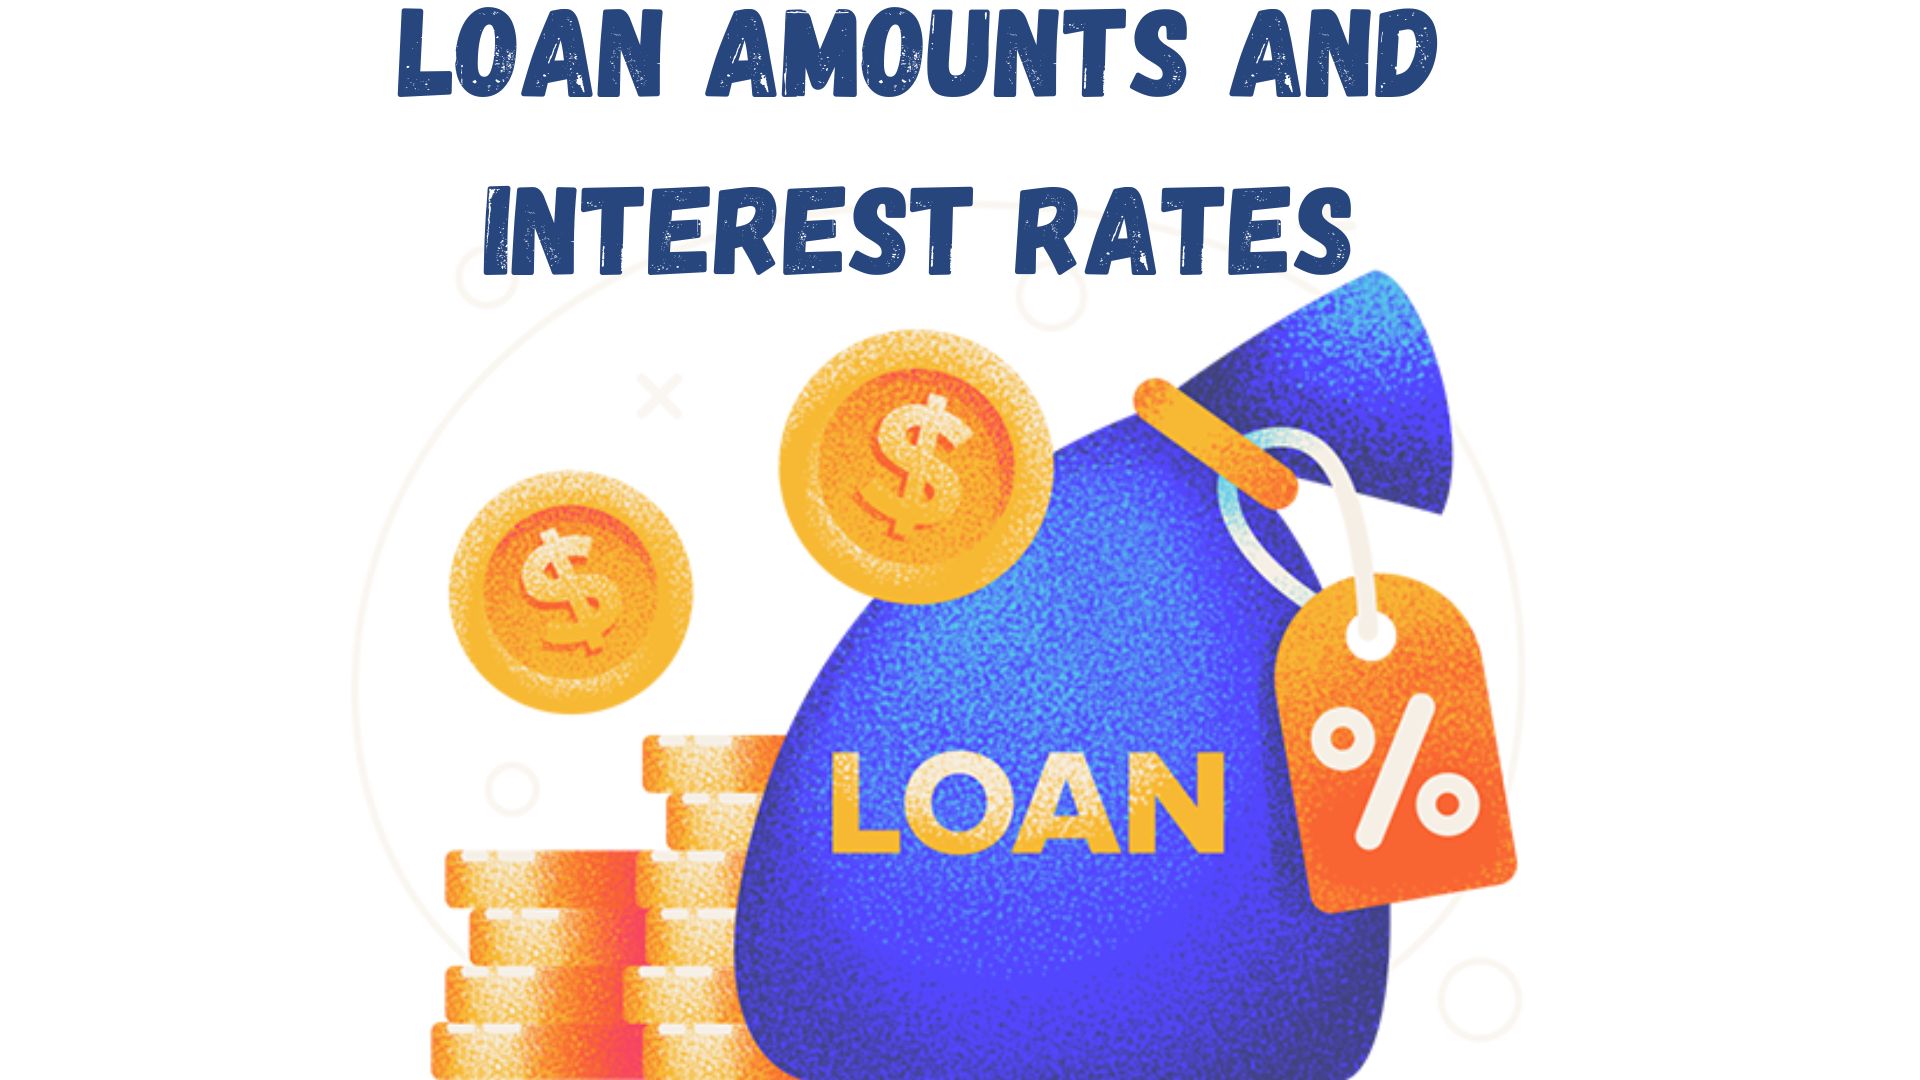 Loan Amounts and Interest Rates